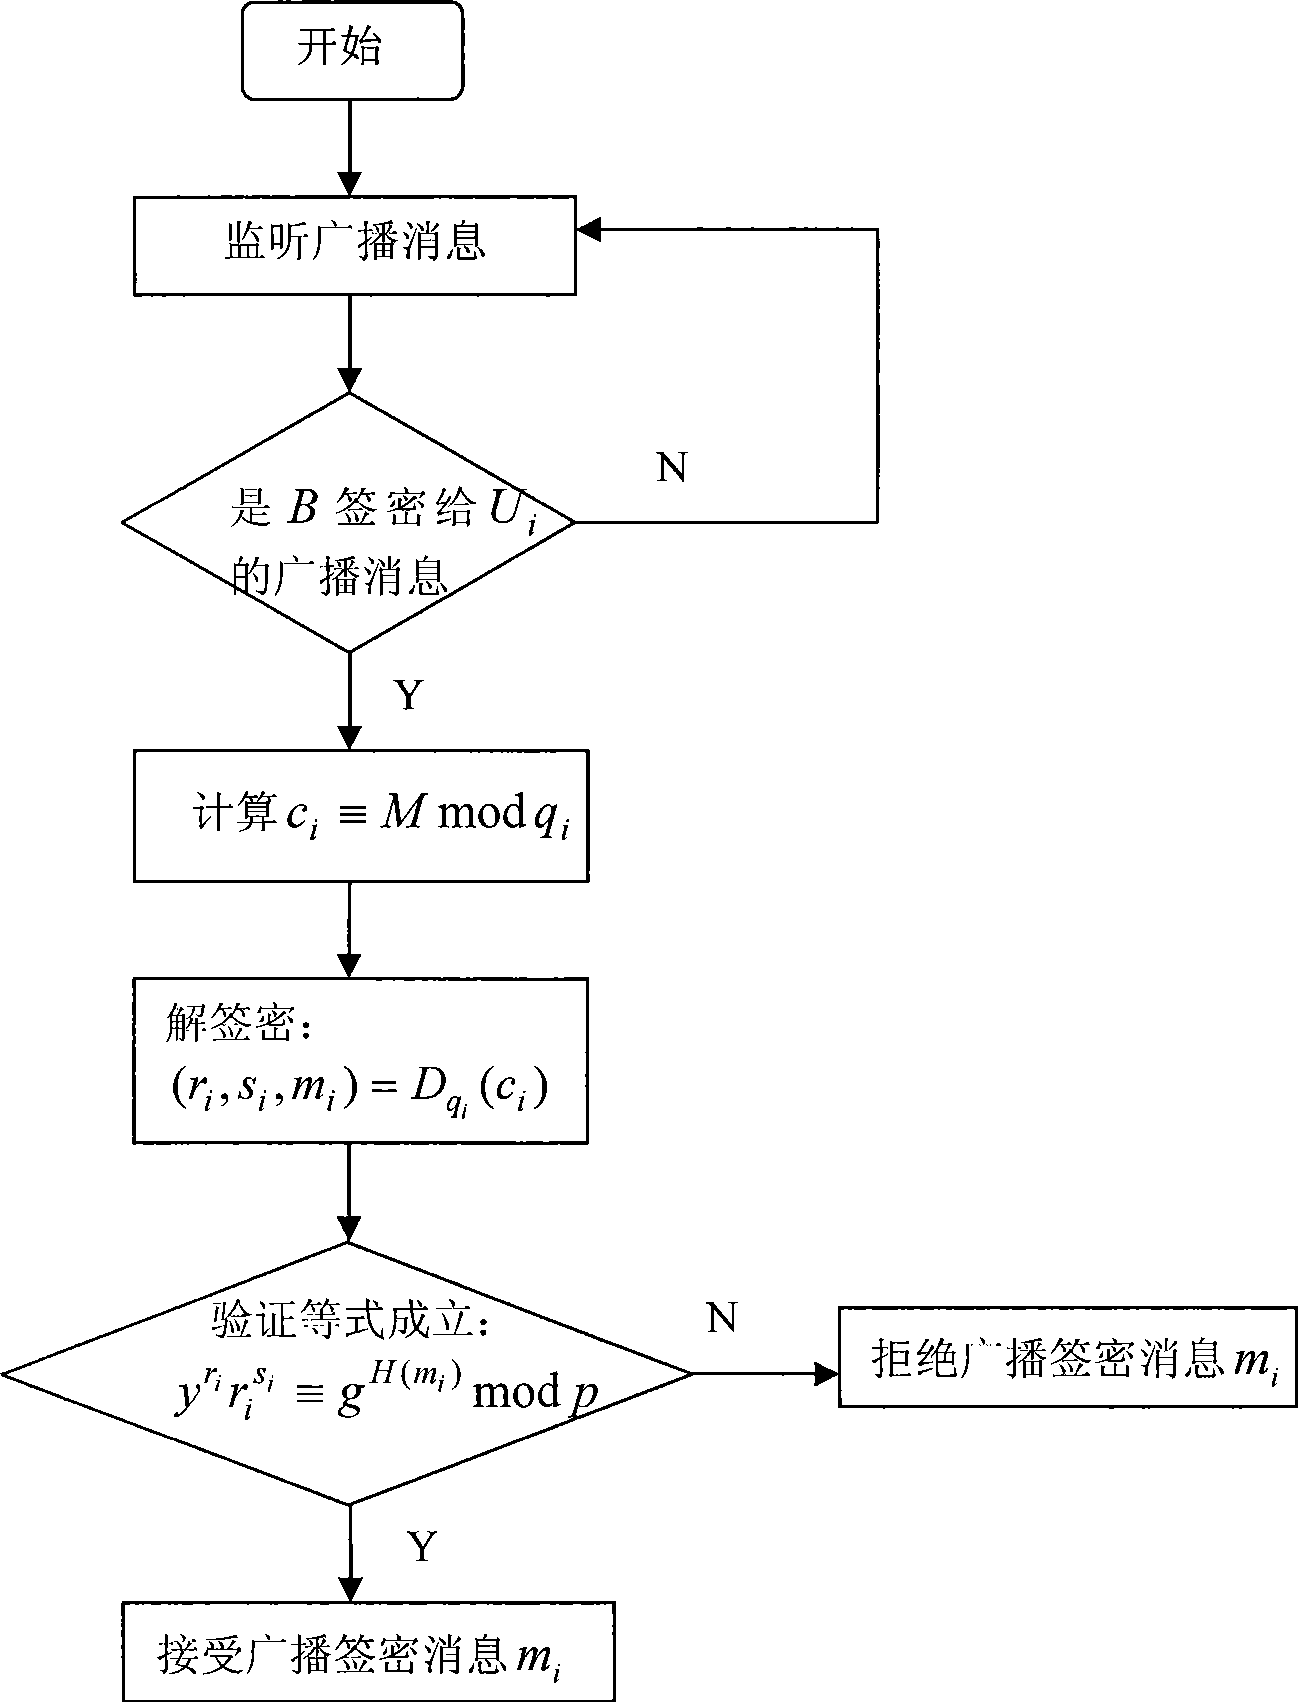 Authentication method by broadcast signature and ciphering